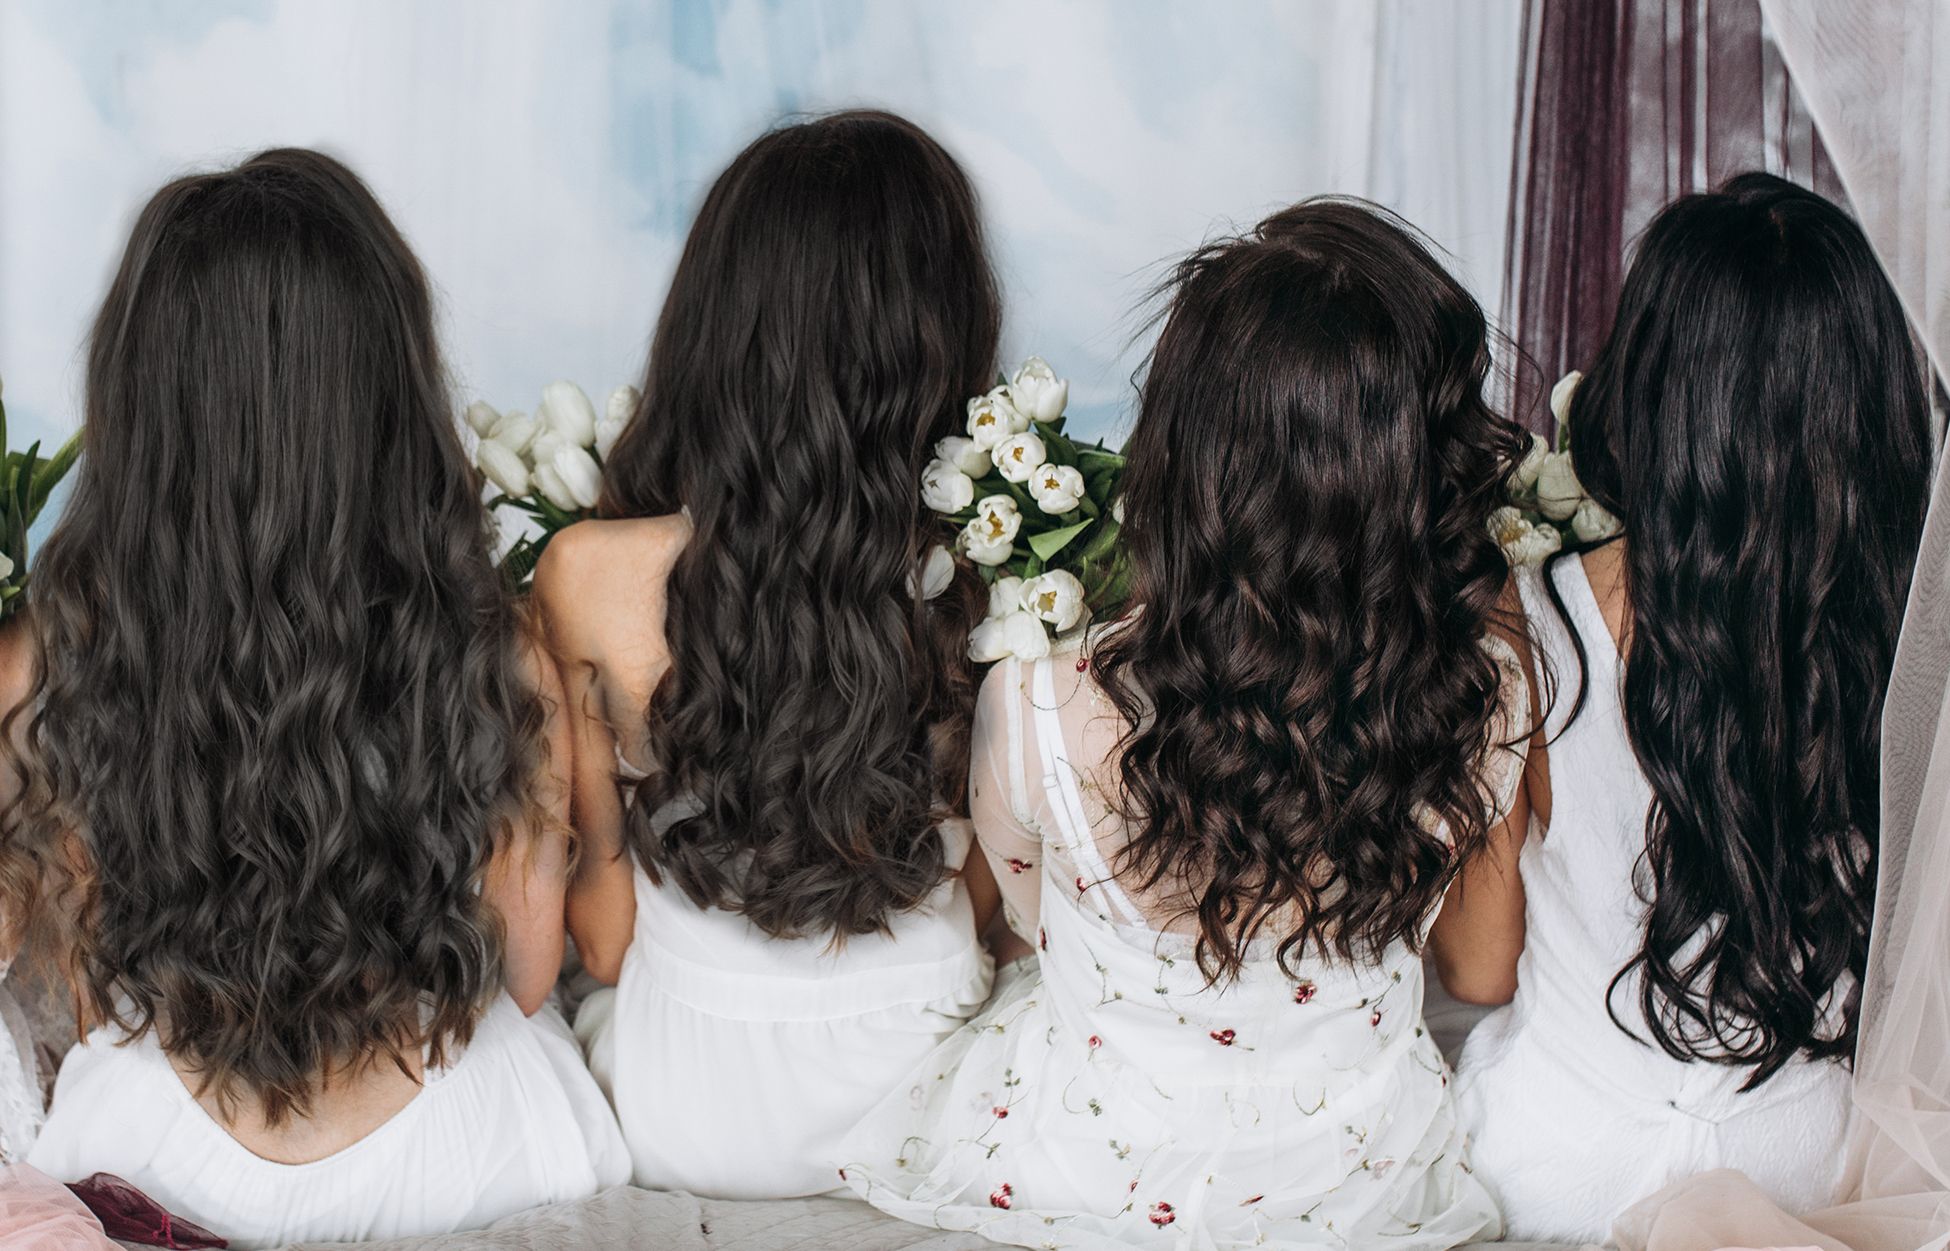 3 to 4 women with long shiny hair, with their backs to the camera